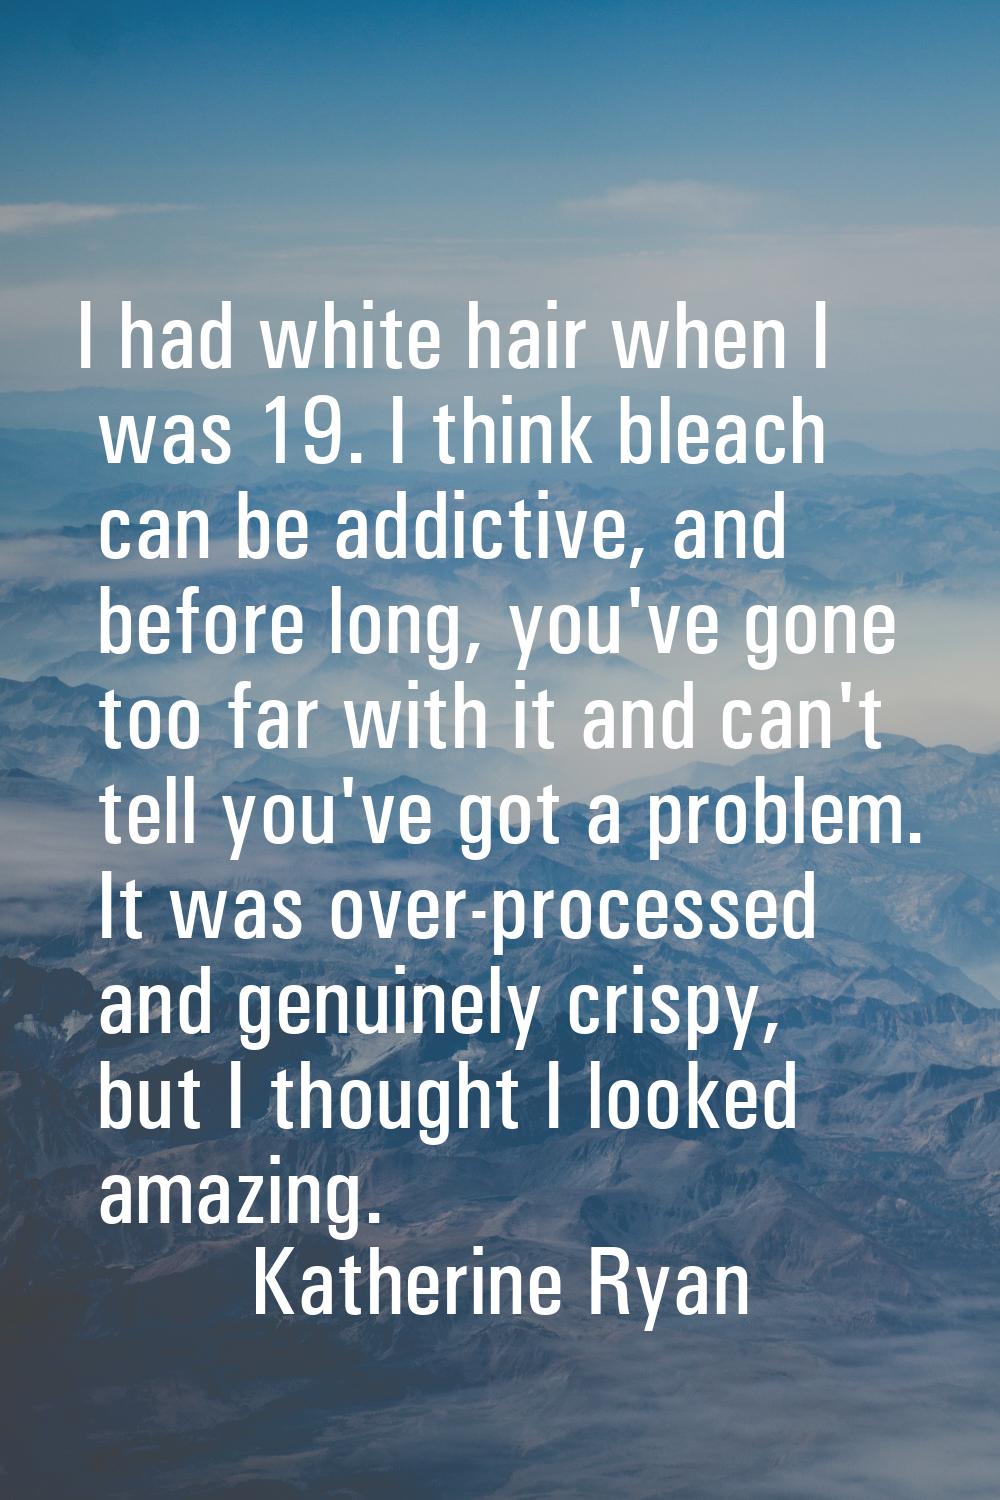 I had white hair when I was 19. I think bleach can be addictive, and before long, you've gone too f